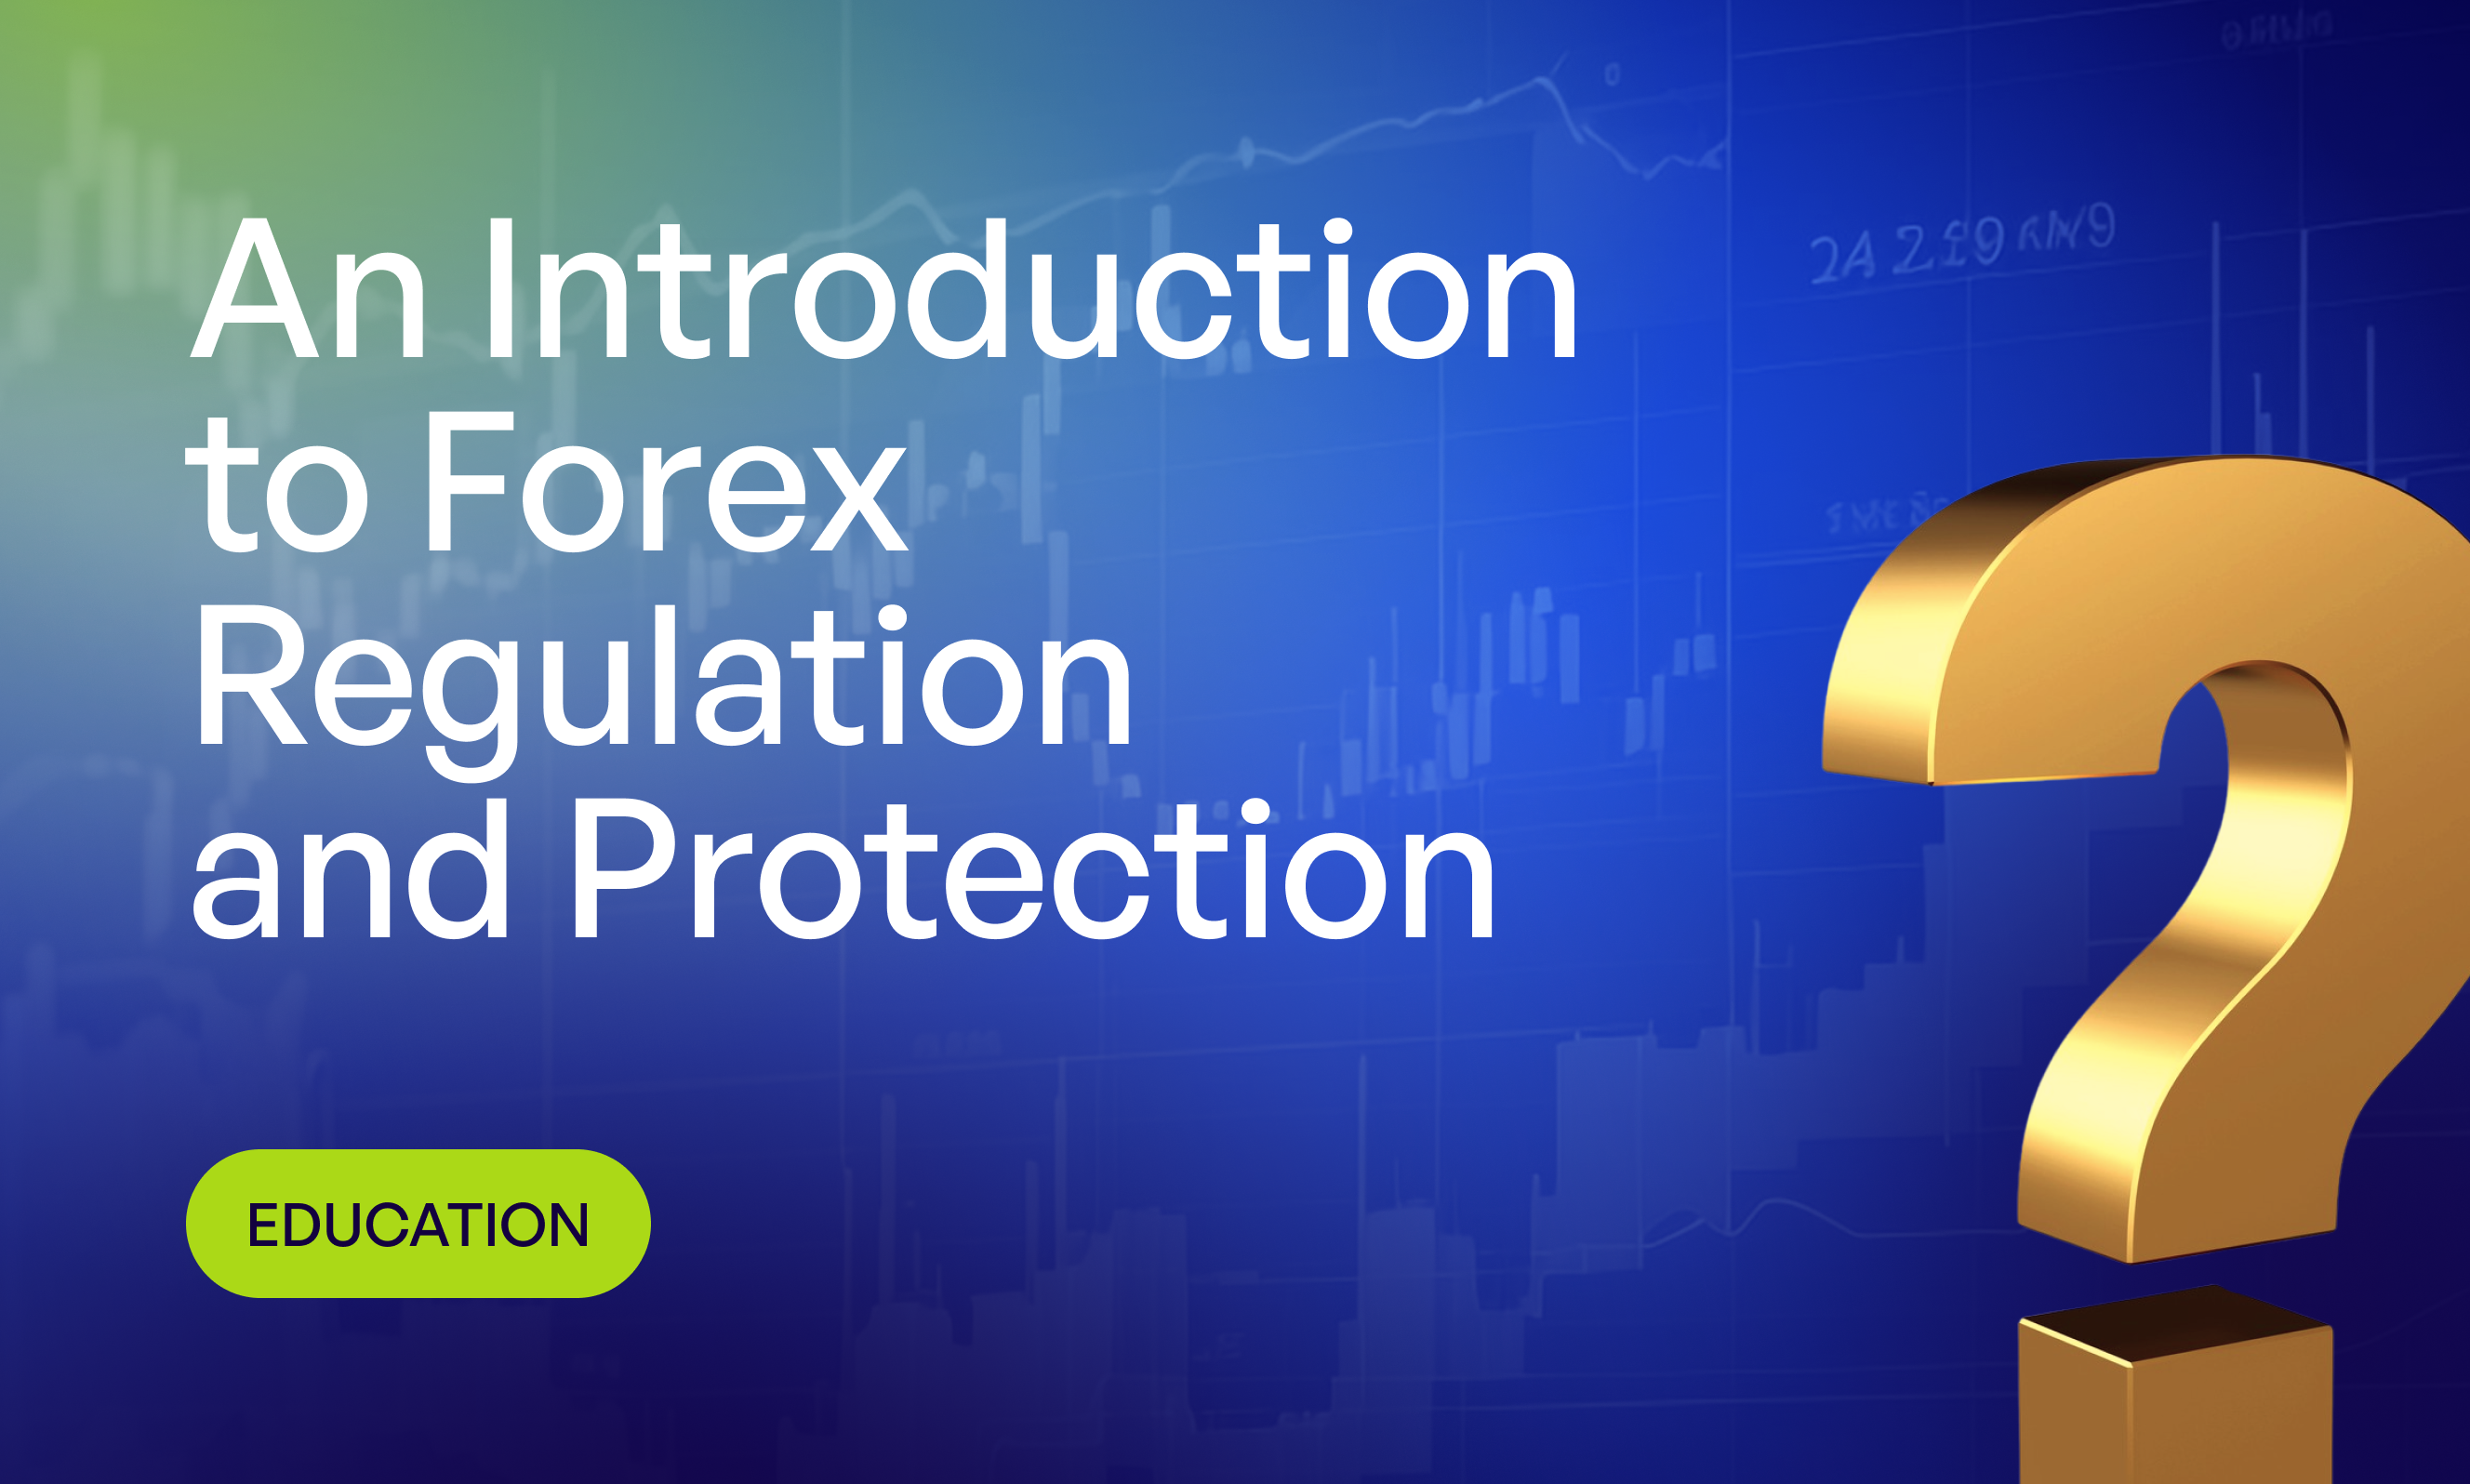 An Introduction to Forex Regulation and Protection